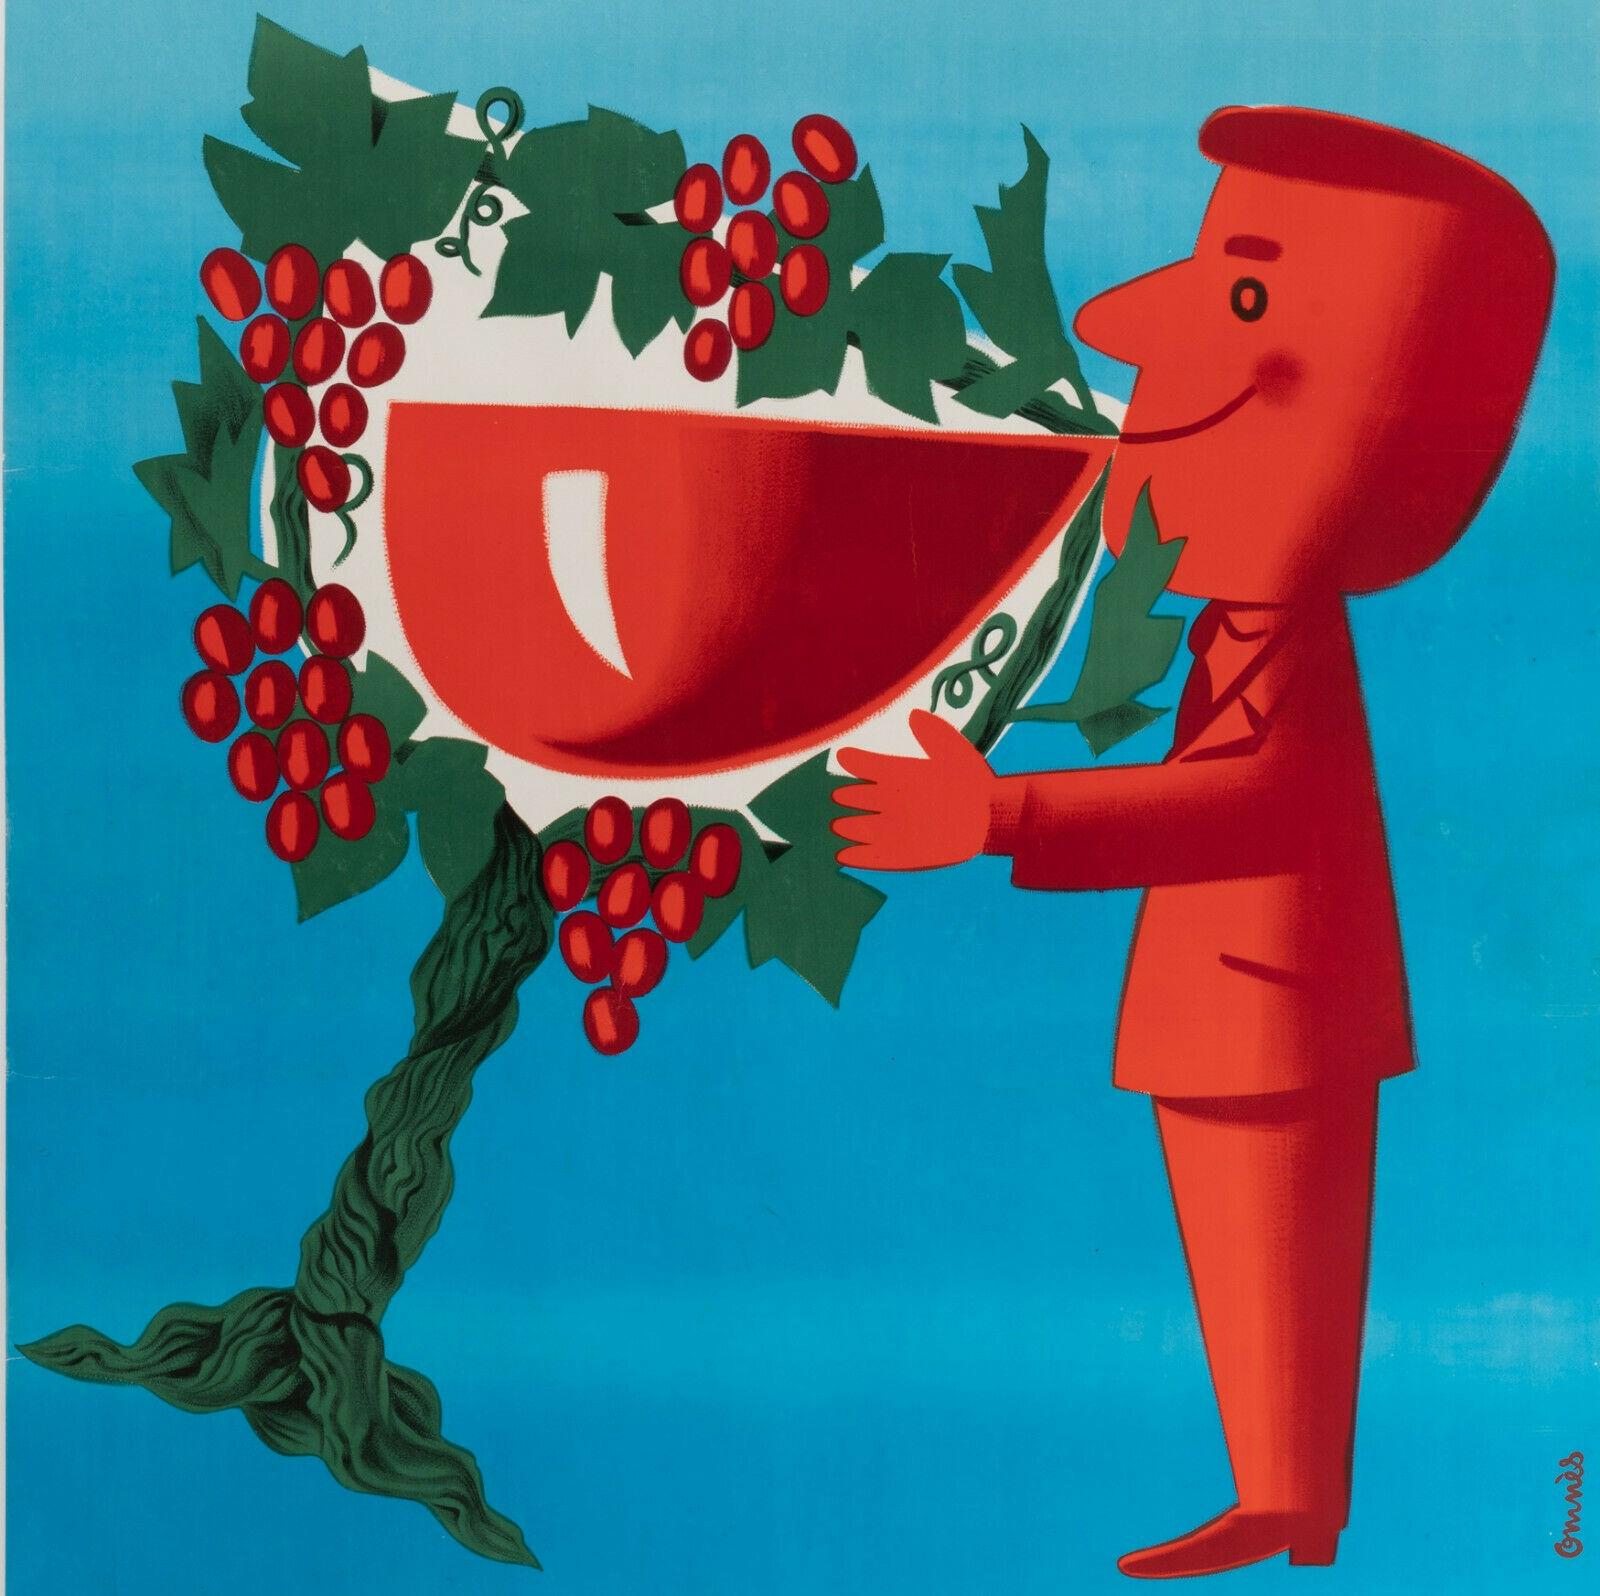 Original Vintage Poster-Omnes-Clapion Wine-Vine Grapes in Glass, c.1950

Poster for the promotion of Clapions Wines.

Additional Details:
Materials and Techniques: Colour lithograph on paper
Color: Blue, Red, Green
Features: Signed, Unframed,